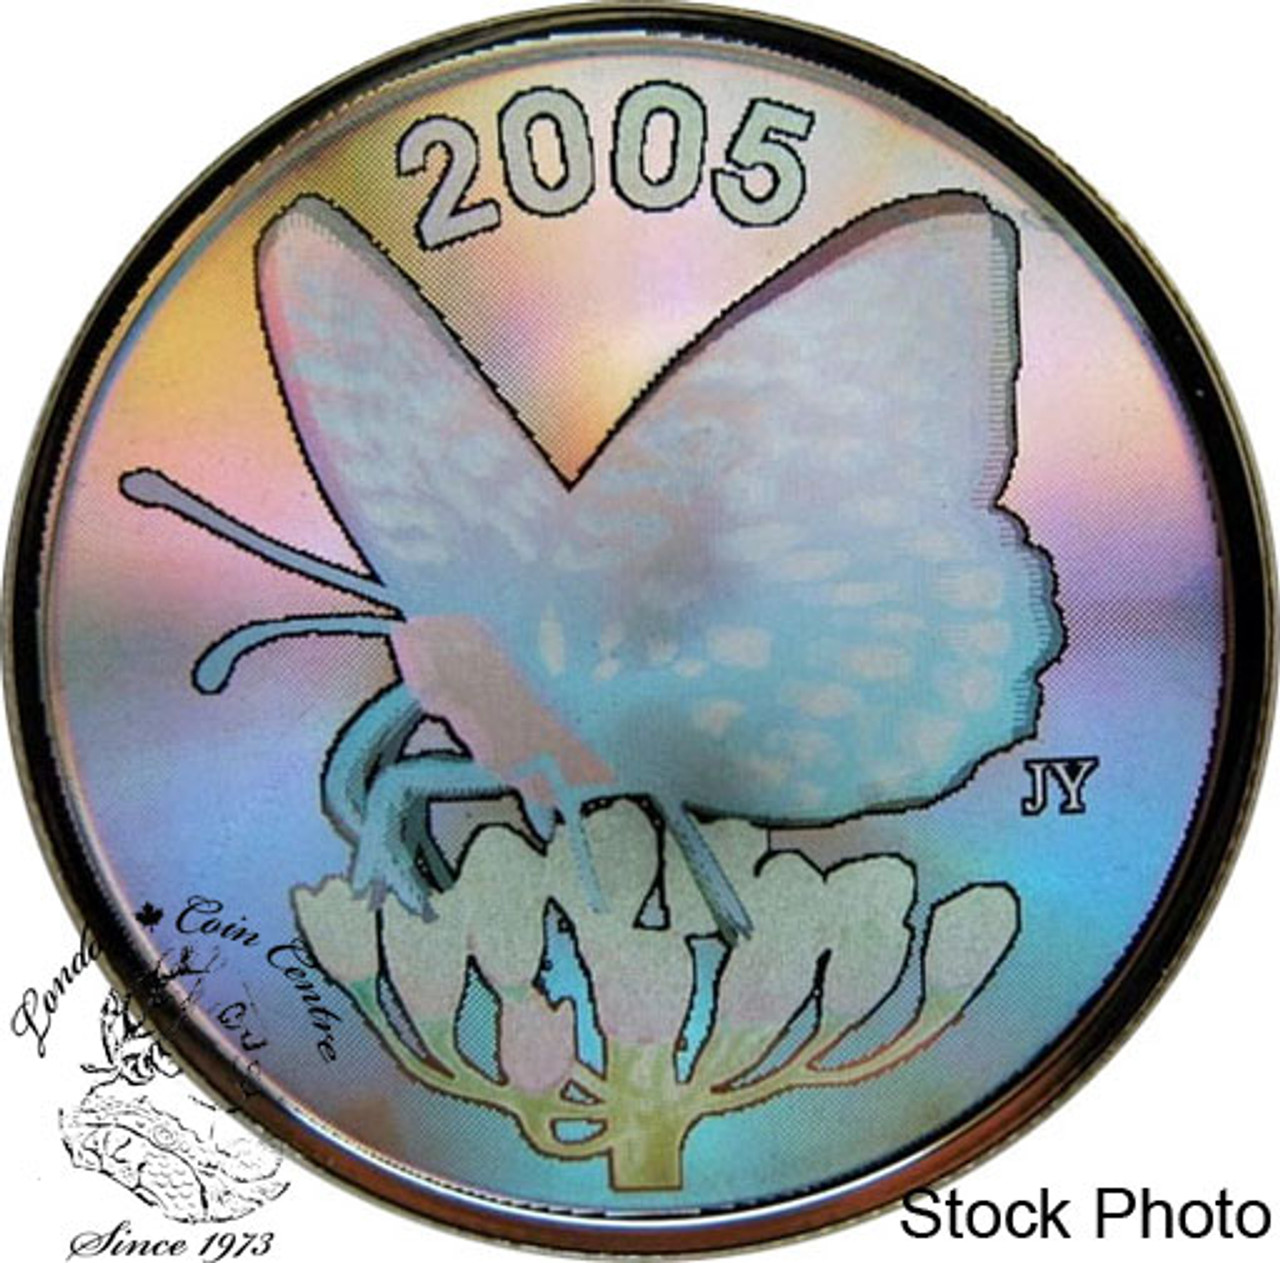 2005 - Canada - 50c - Monarch Butterfly – MK Coins